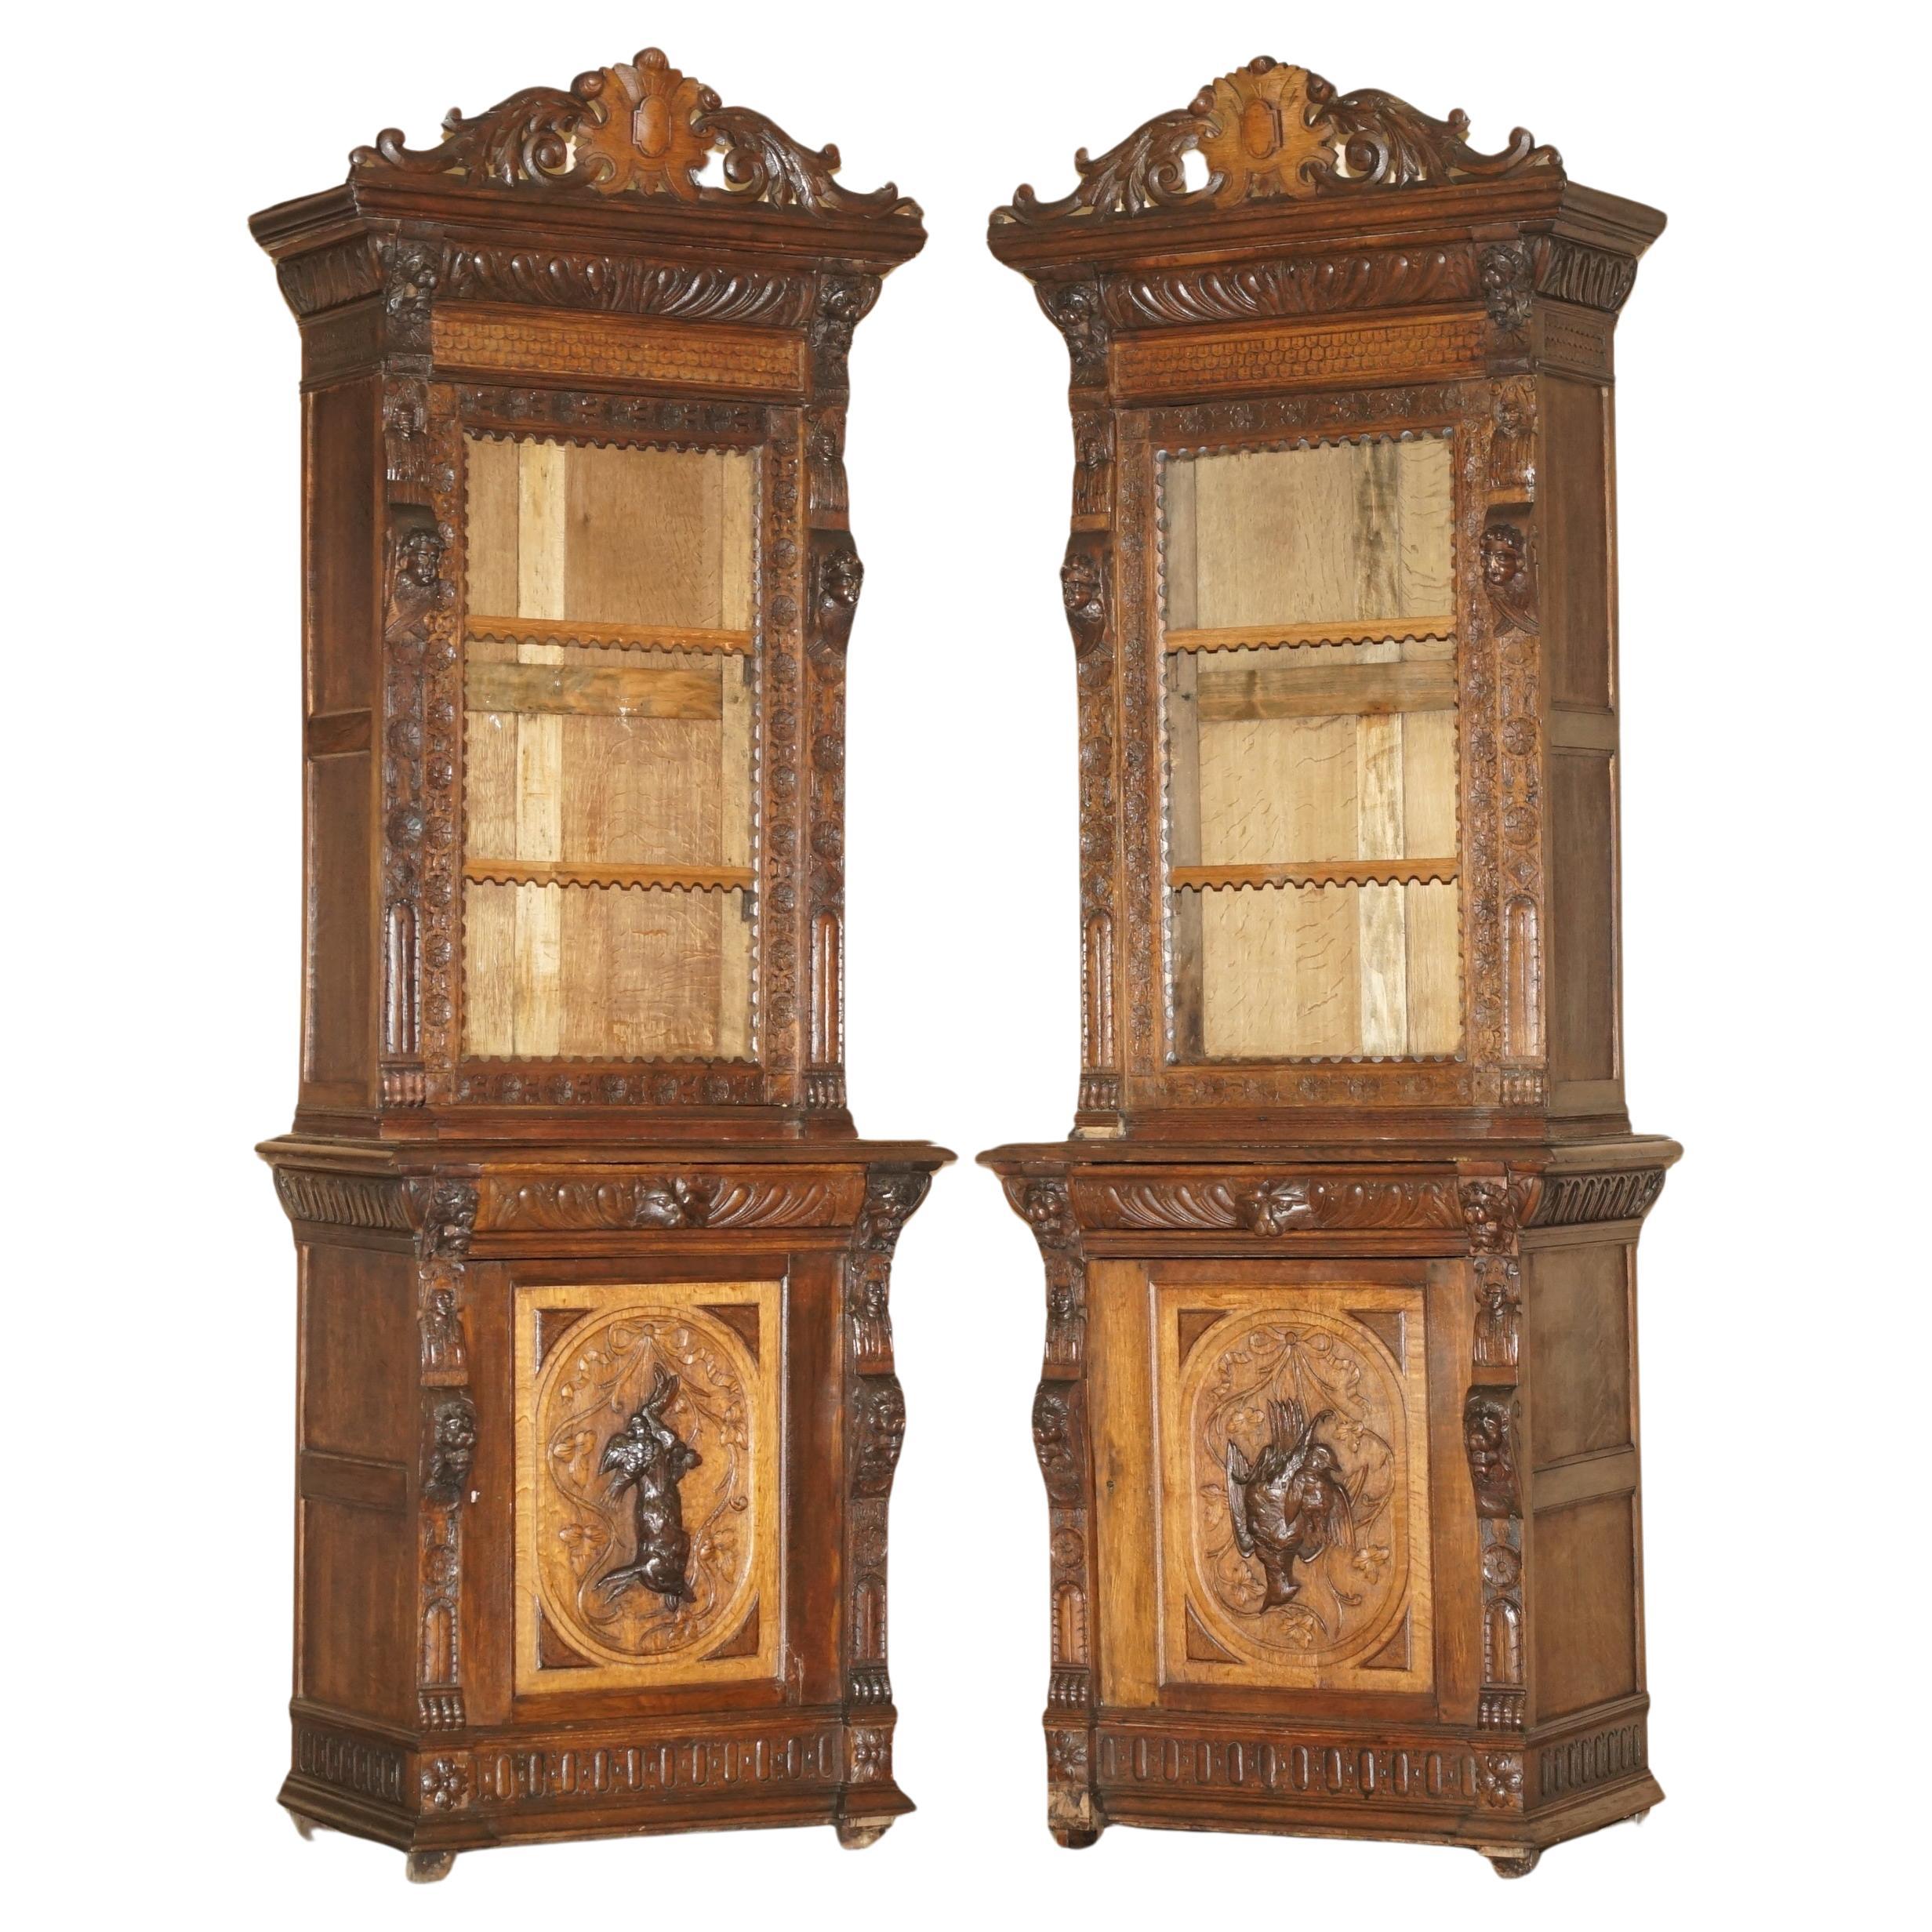 PAIR OF ANTIQUE ViCTORIAN 1880 CONTINENTAL JACOBEAN GOTHIC REVIVAL BOOKCASES For Sale